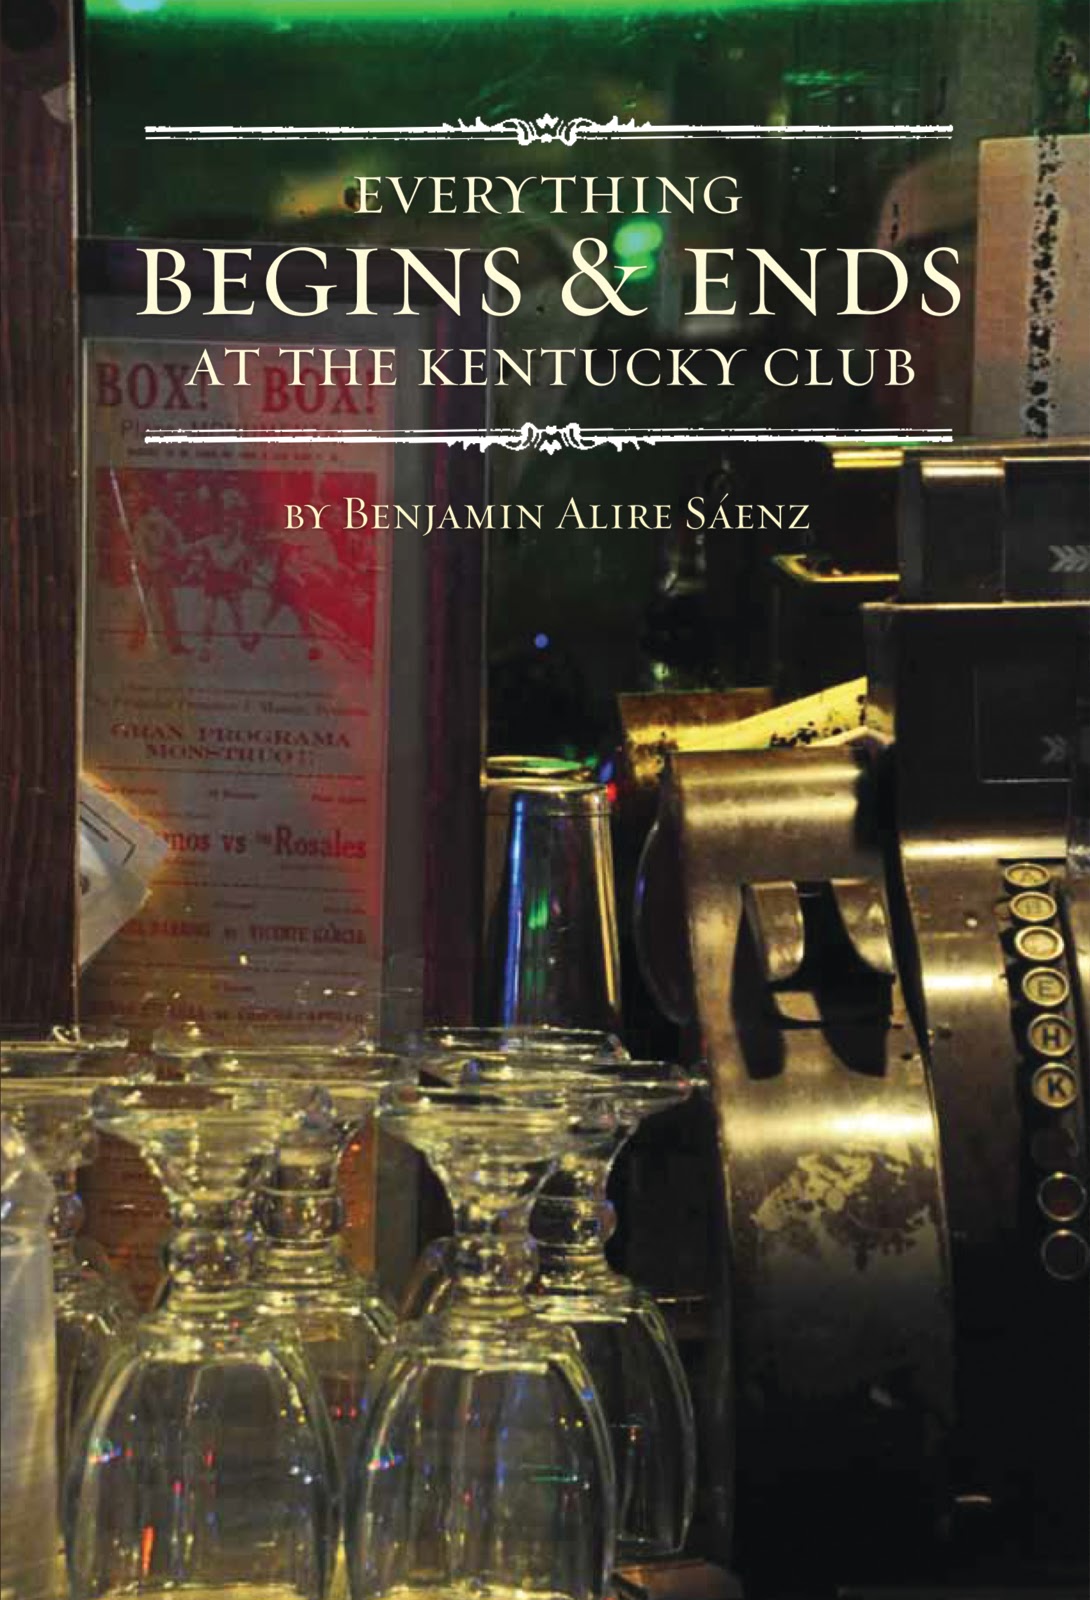 Everything Begins and Ends at the Kentucky Club book jacket